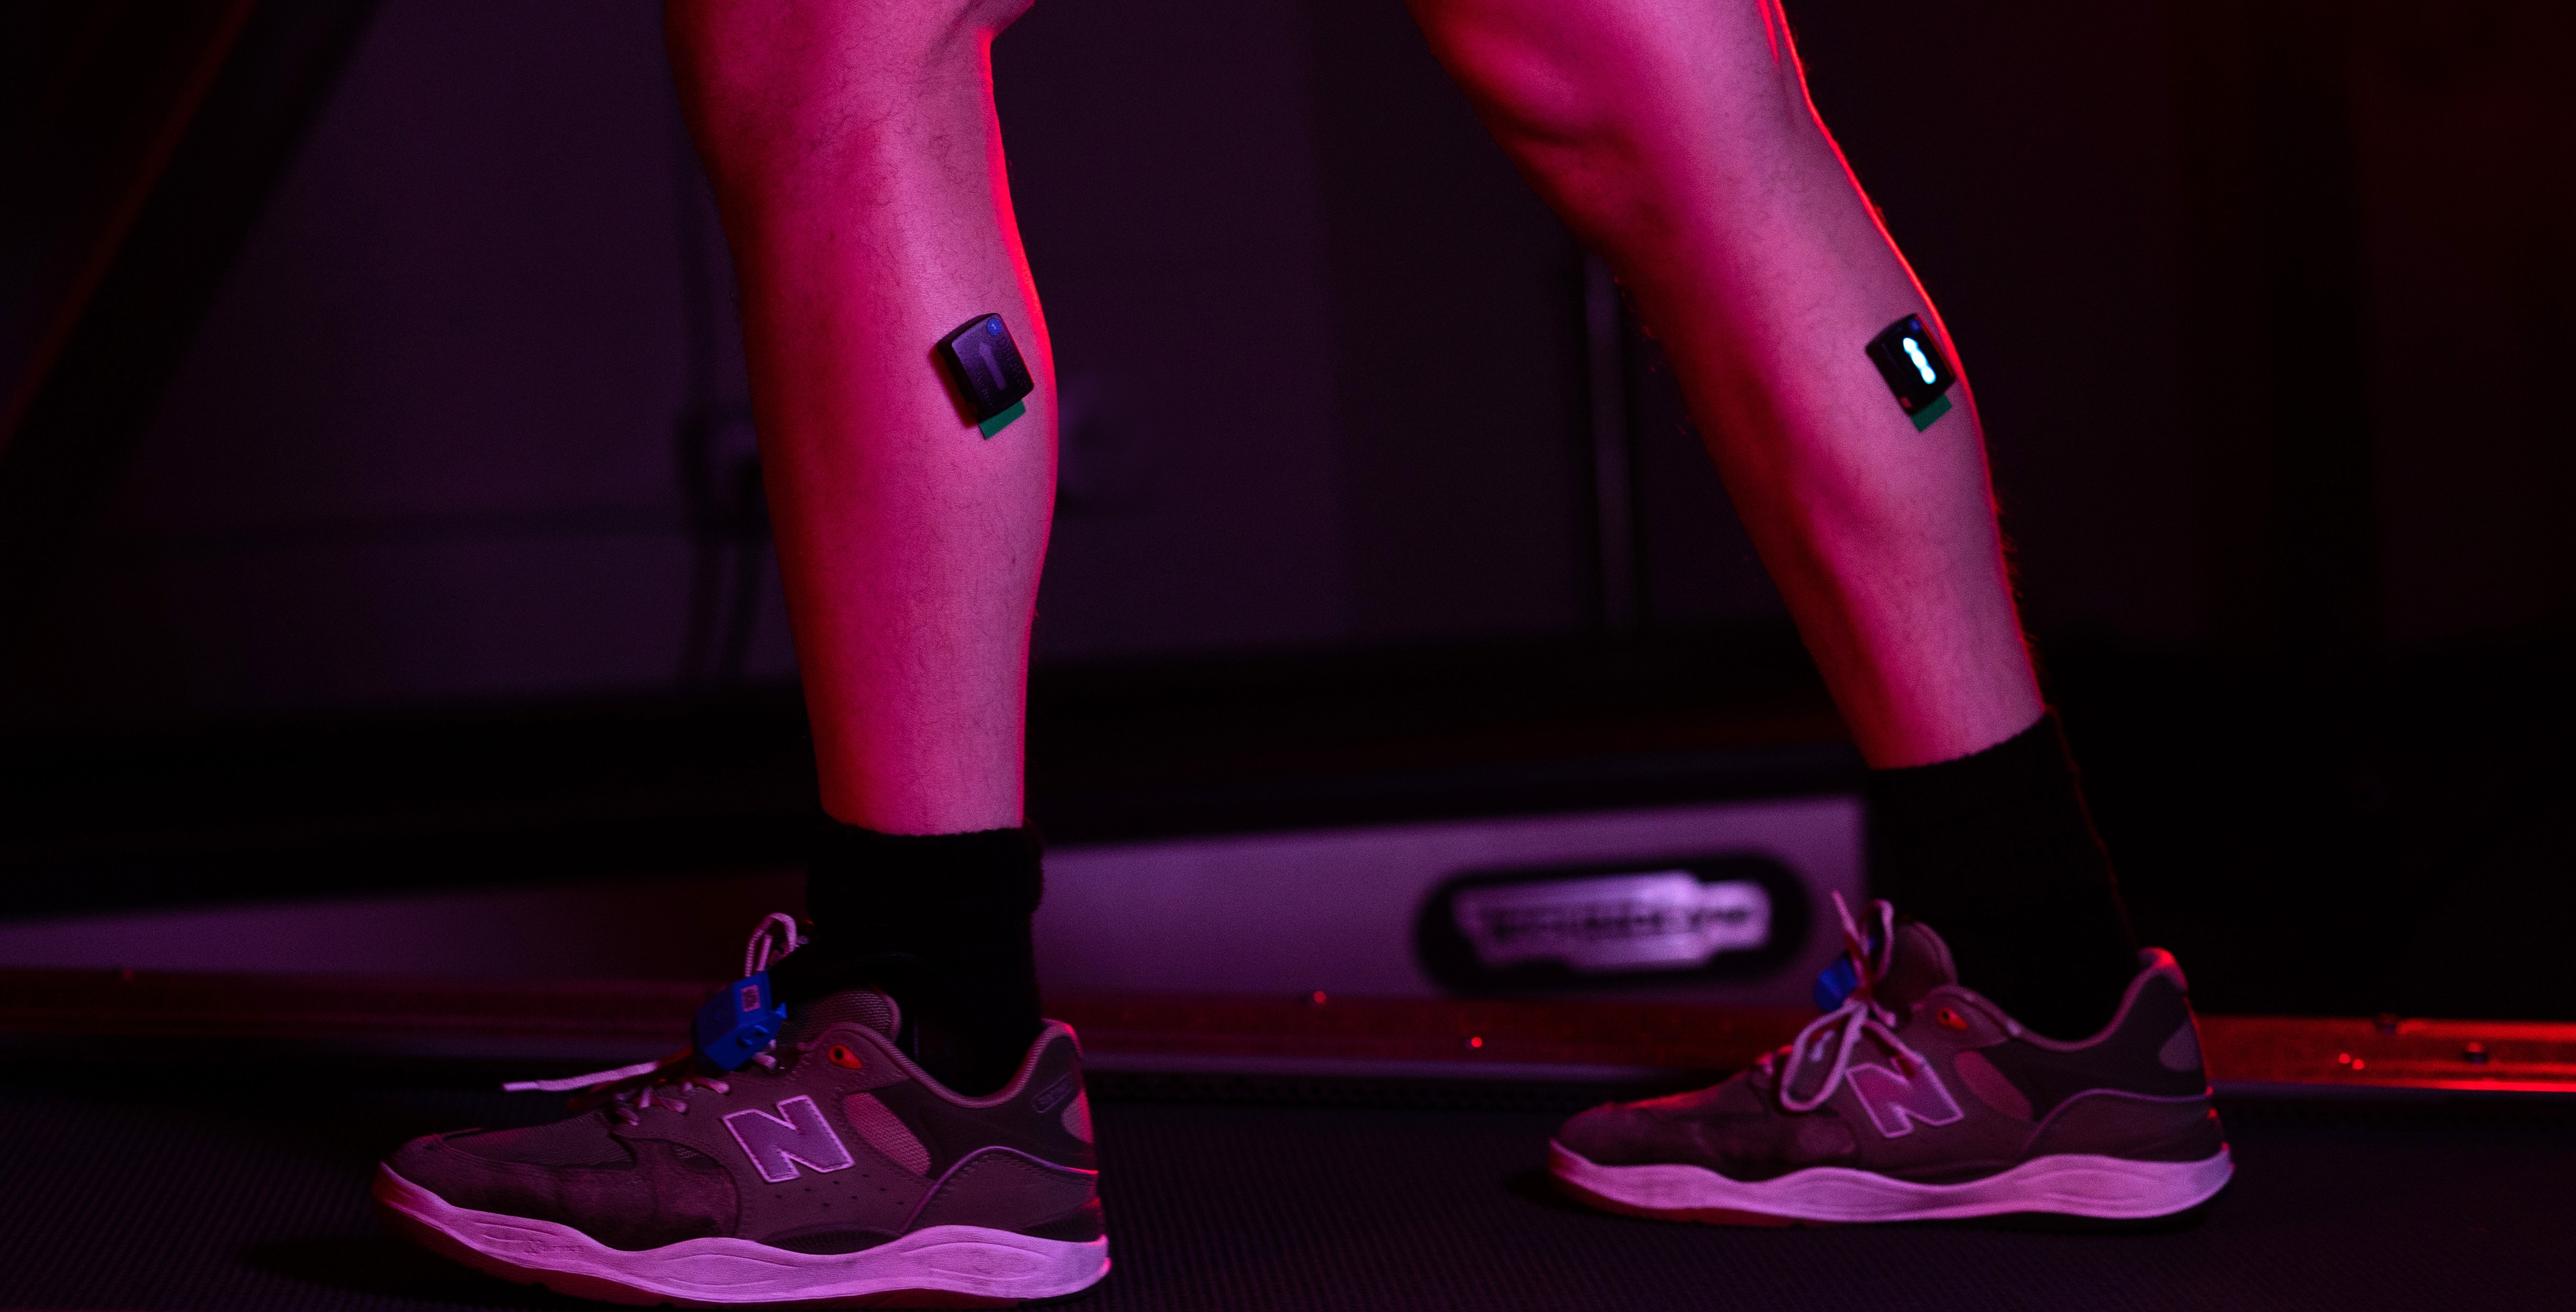 Person's legs with monitors attached while walking on treadmill